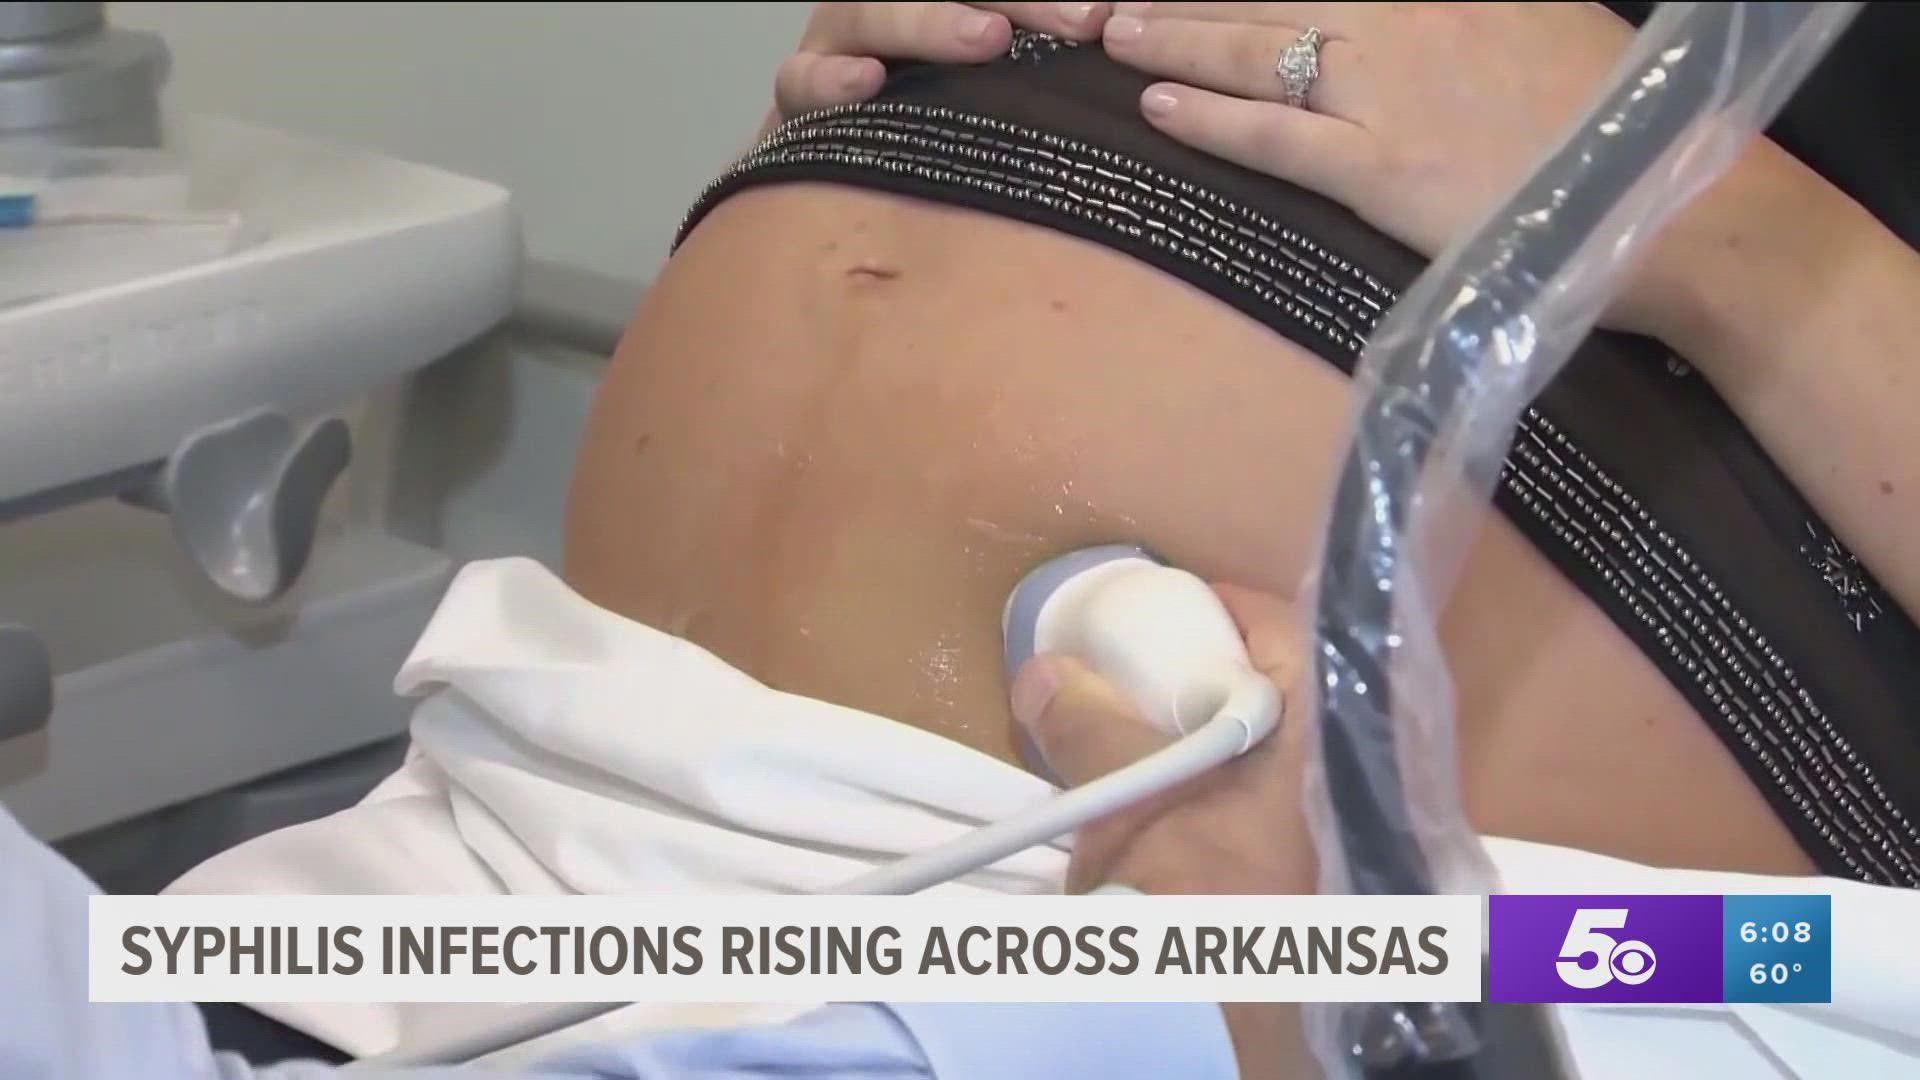 Arkansas is seeing a spike in the number of syphilis infections, especially in women. The ADH says pregnant women who are infected should seek treatment immediately.